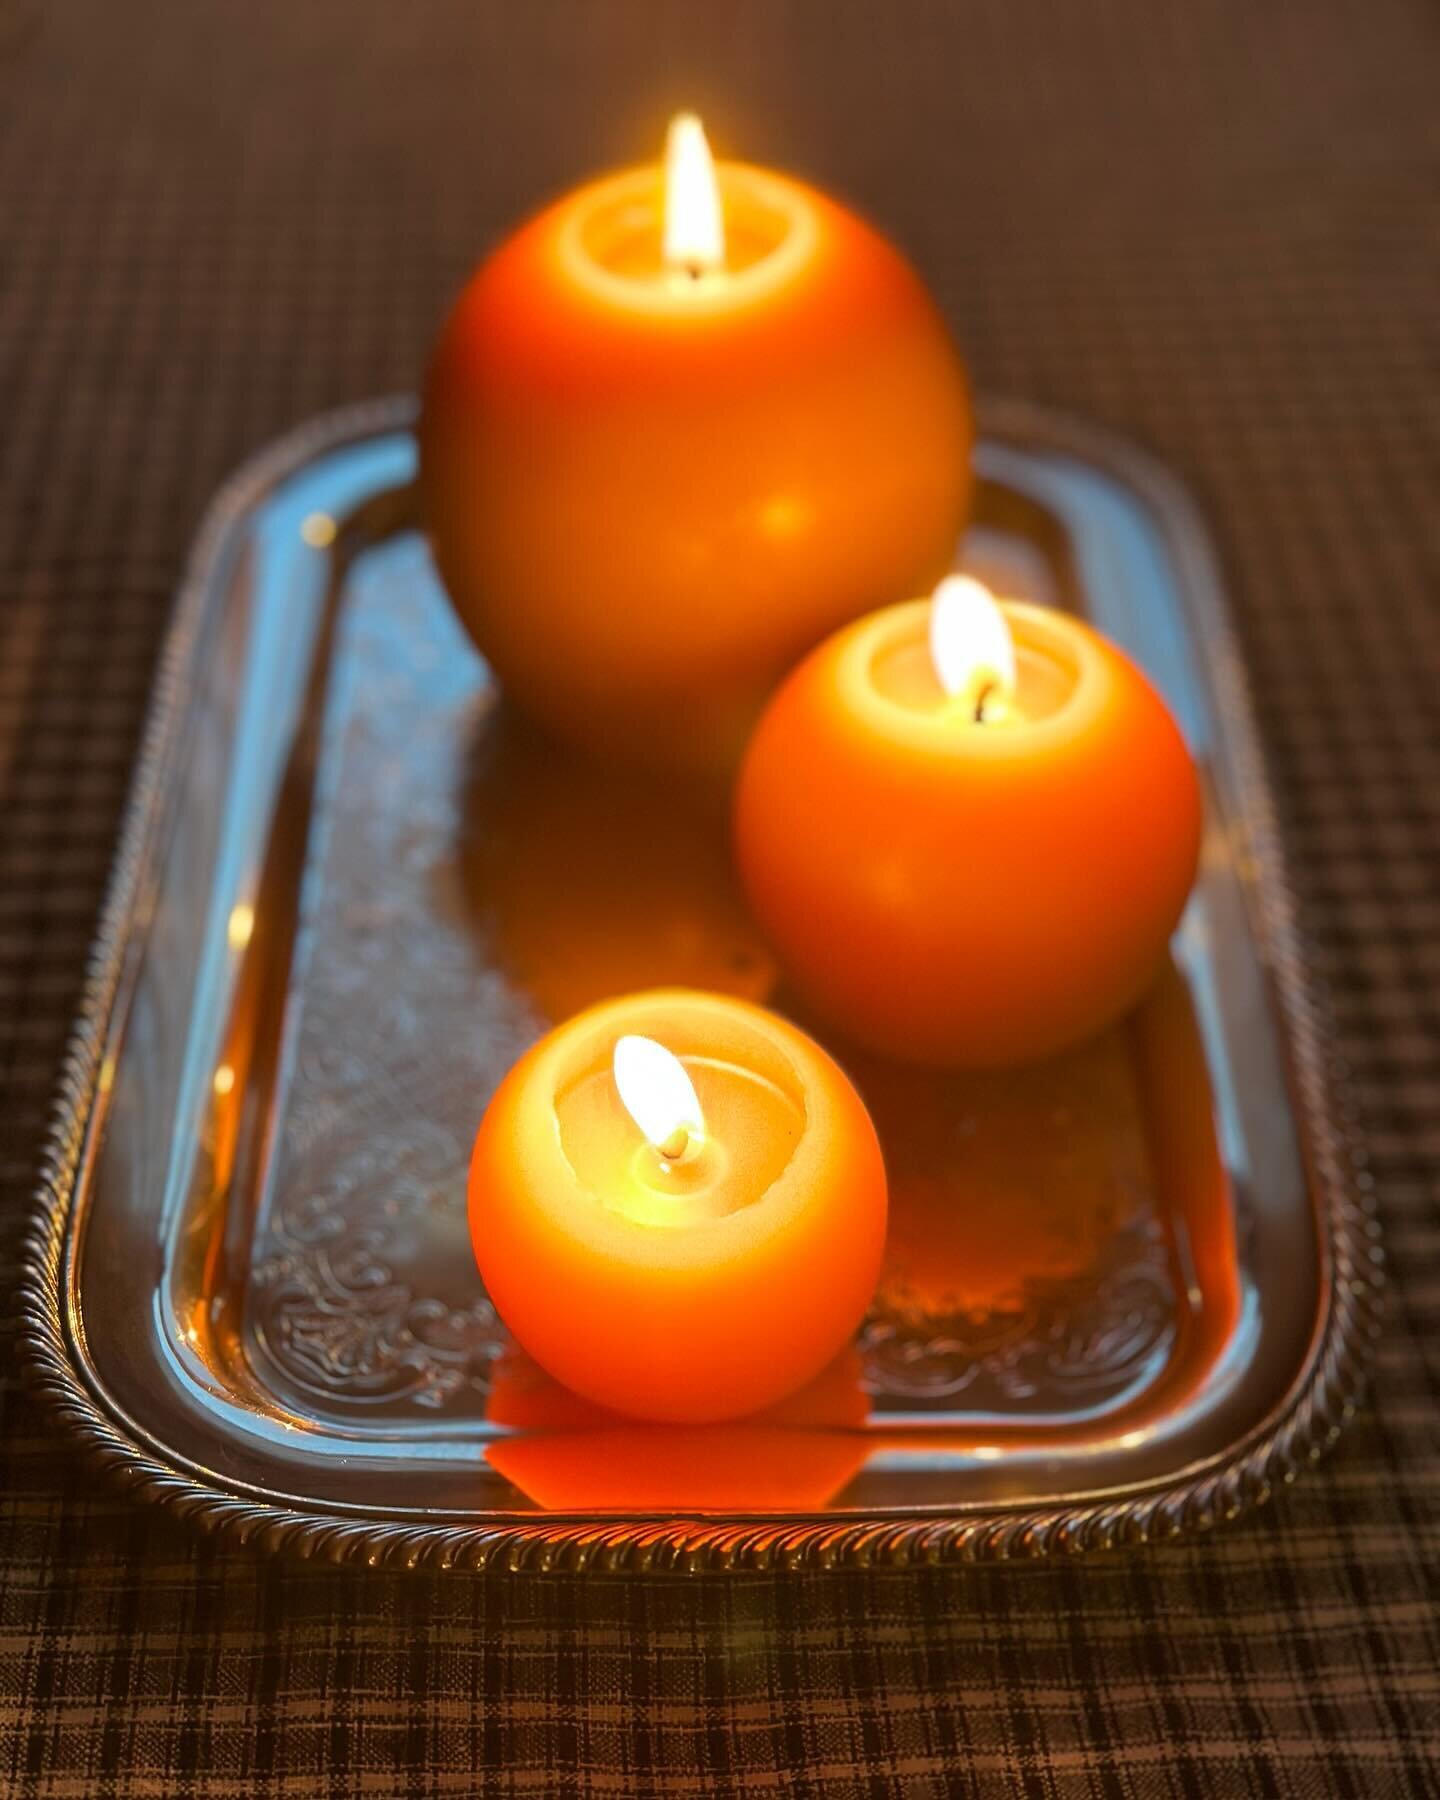 We&rsquo;re in the short day season here - 8:00 a.m. and we need breakfast candles! Is anyone else looking forward to getting past the winter solstice?